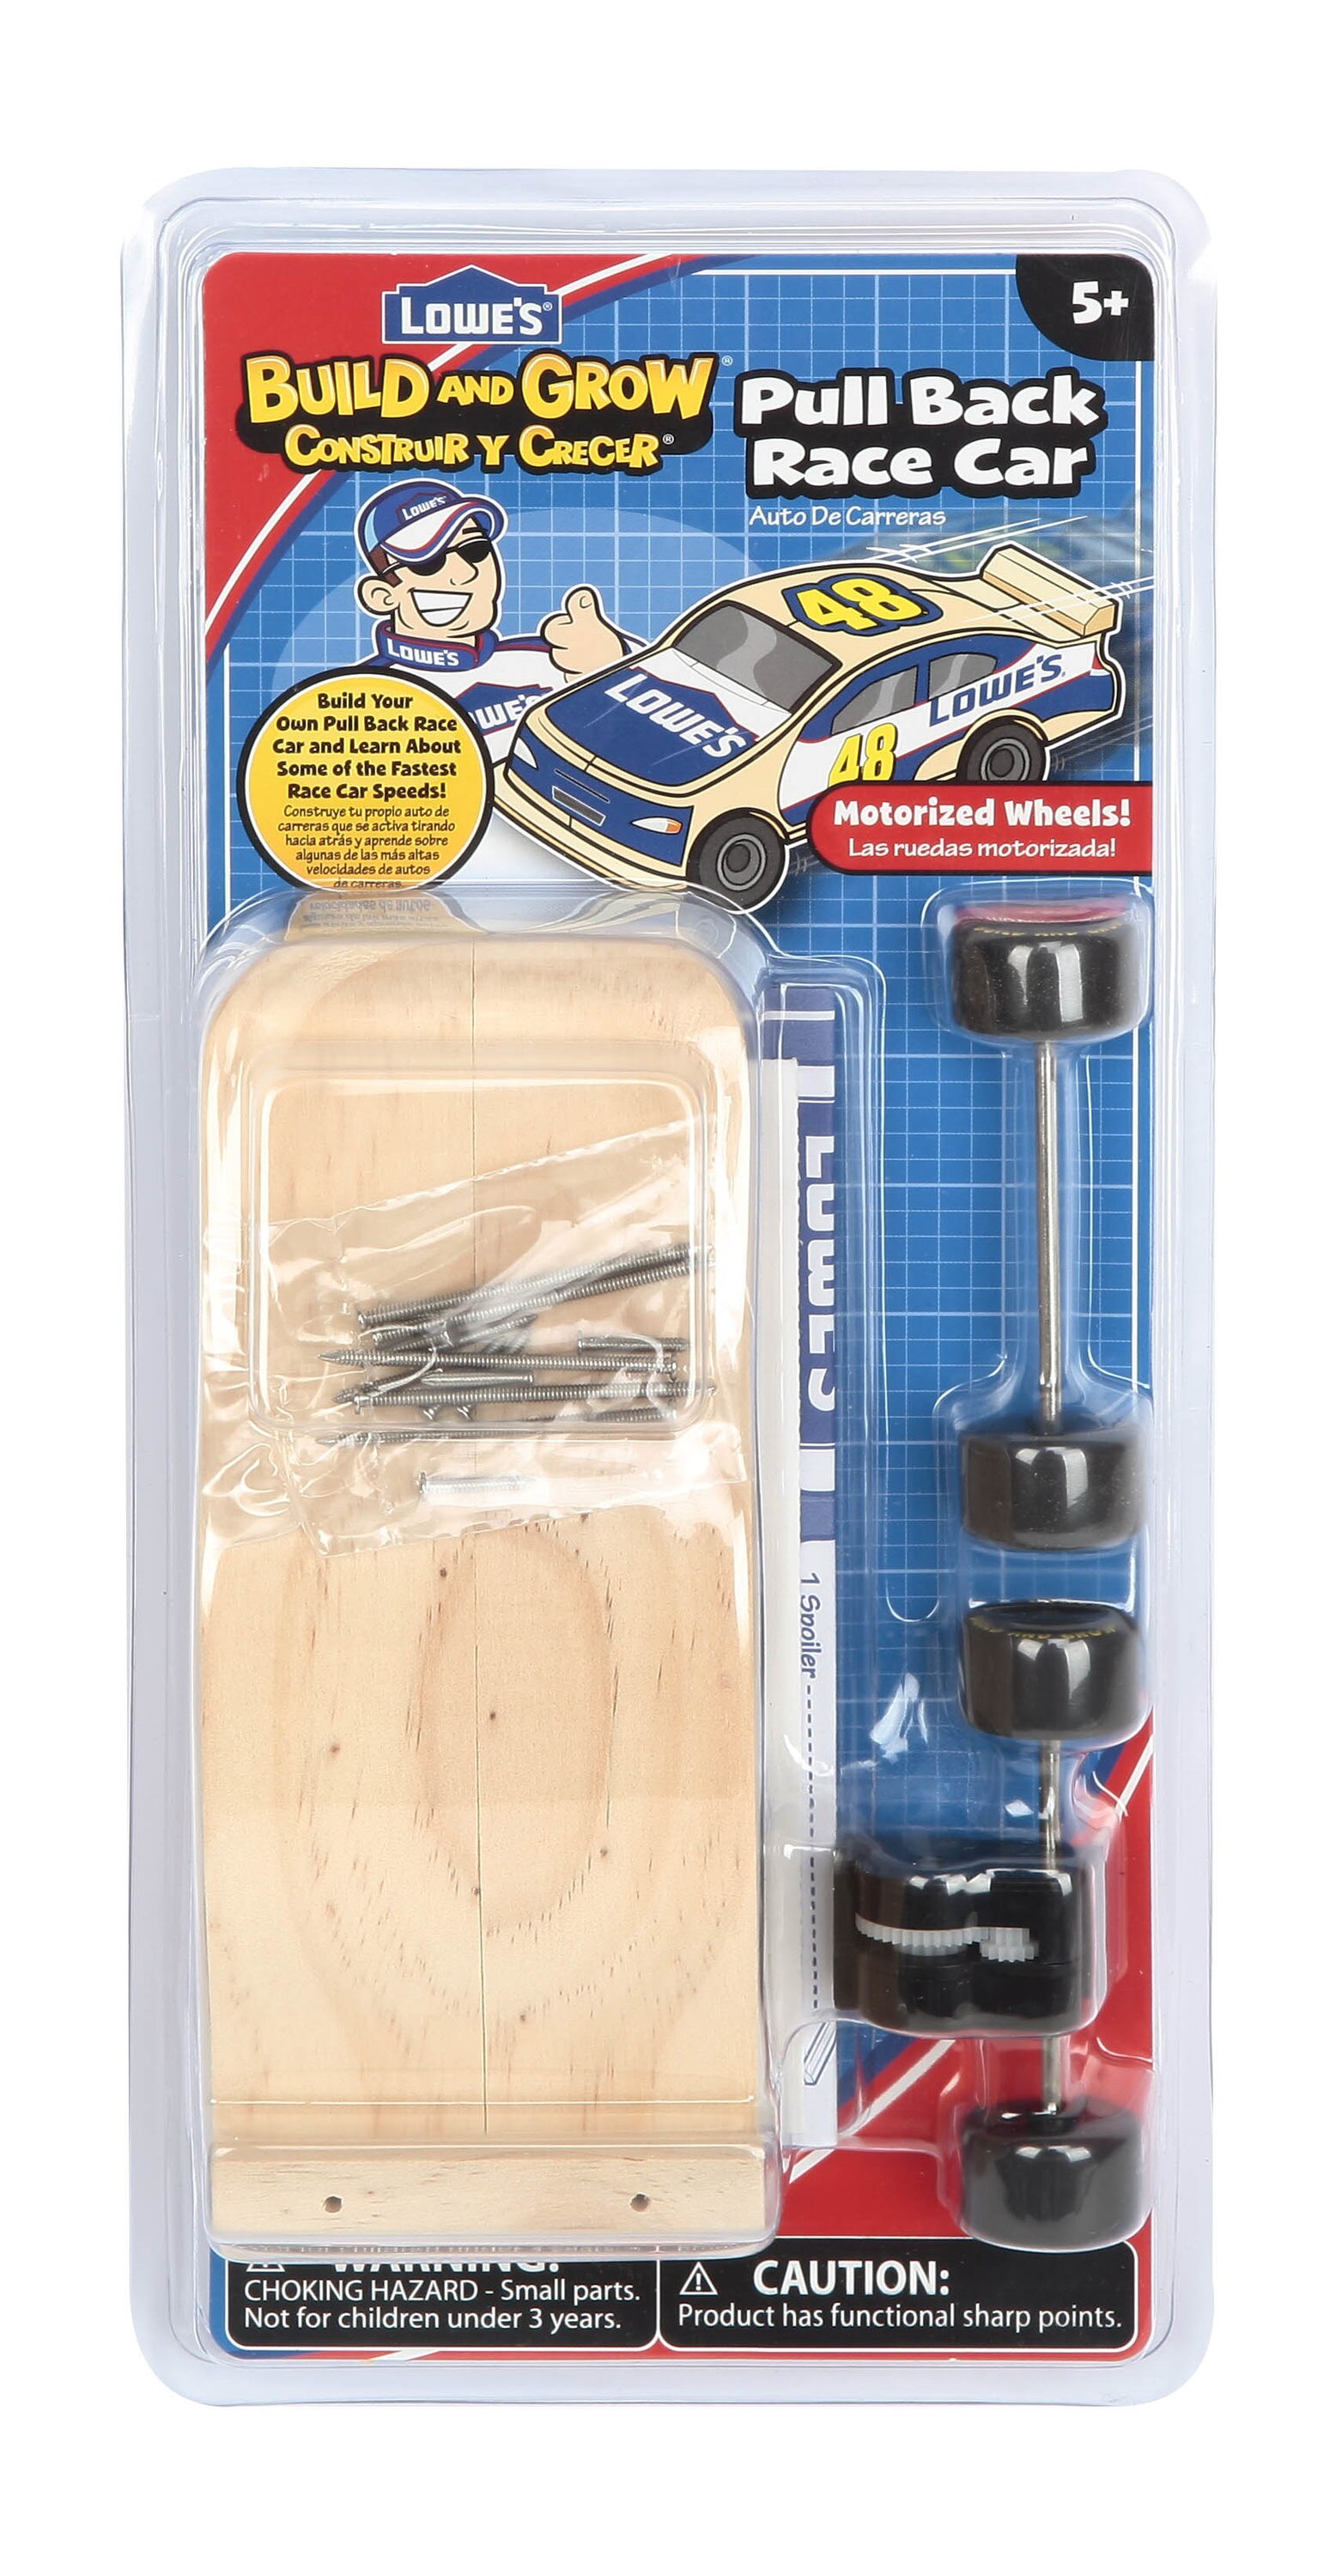 Build and Grow Kid's Pull Back Race Car Project Kit at